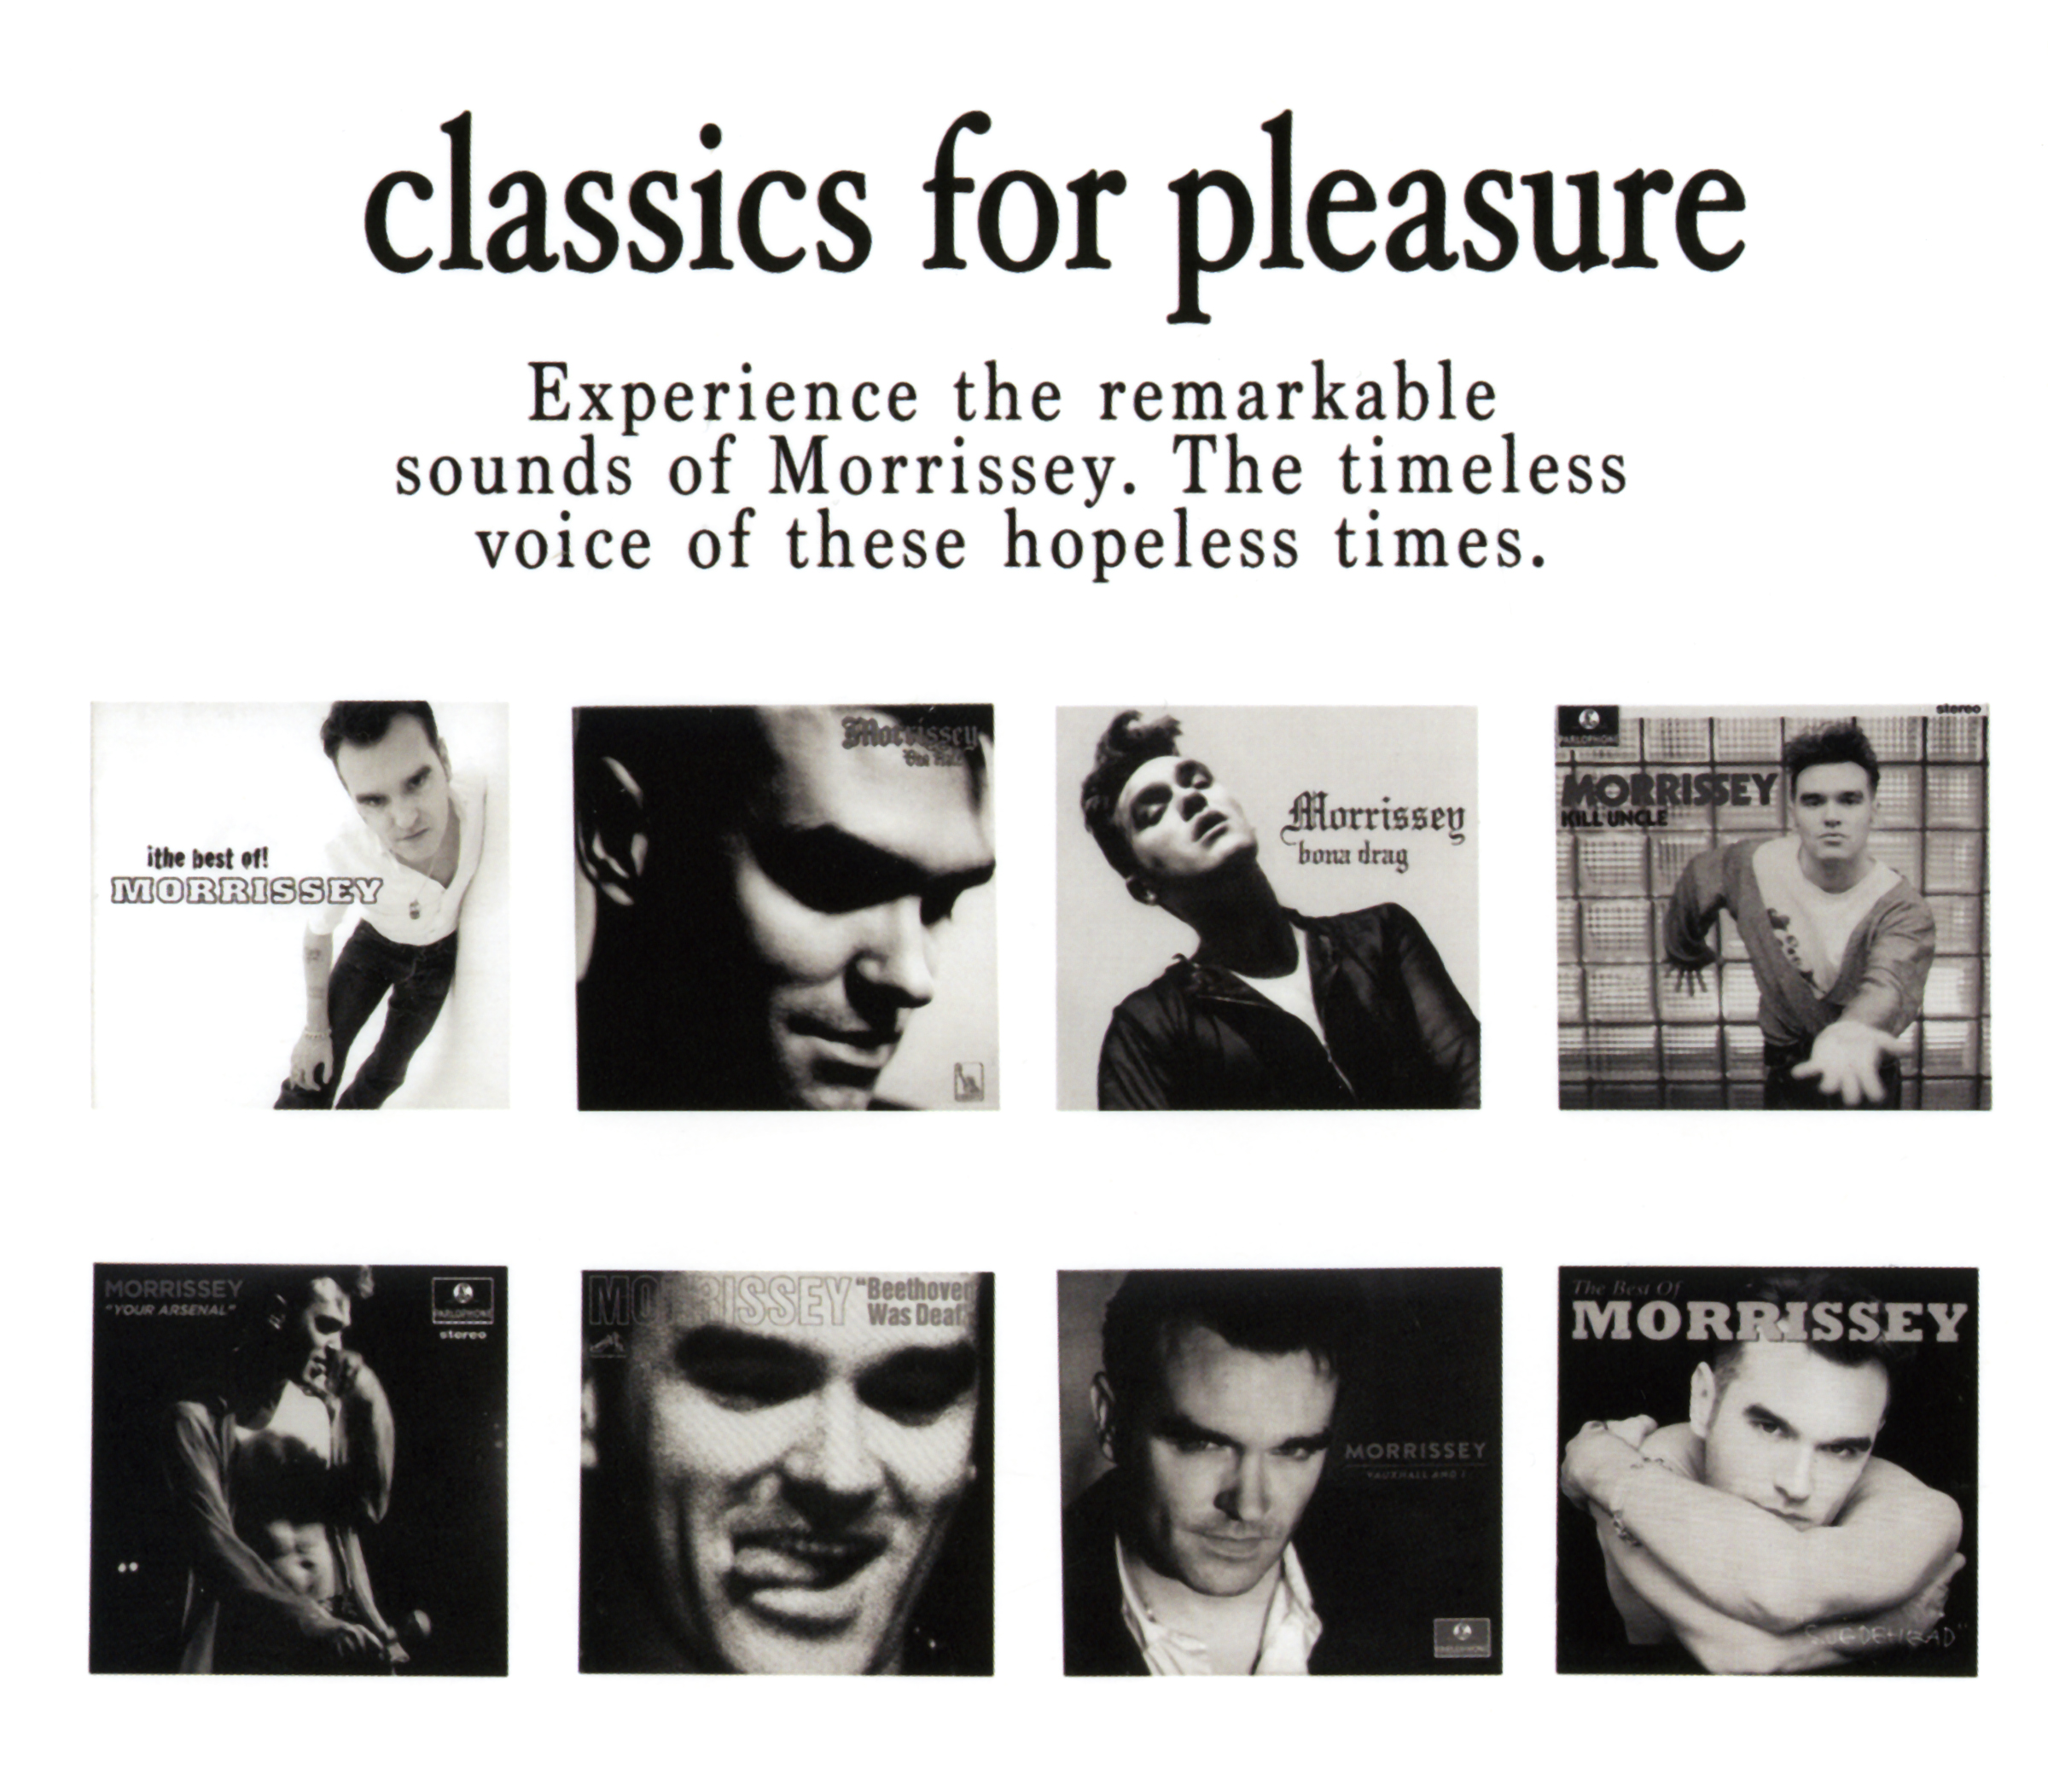 2019-05-24 'California Son' By Morrissey [U.S. Étienne Records Pressing] [Inside Panel 1]